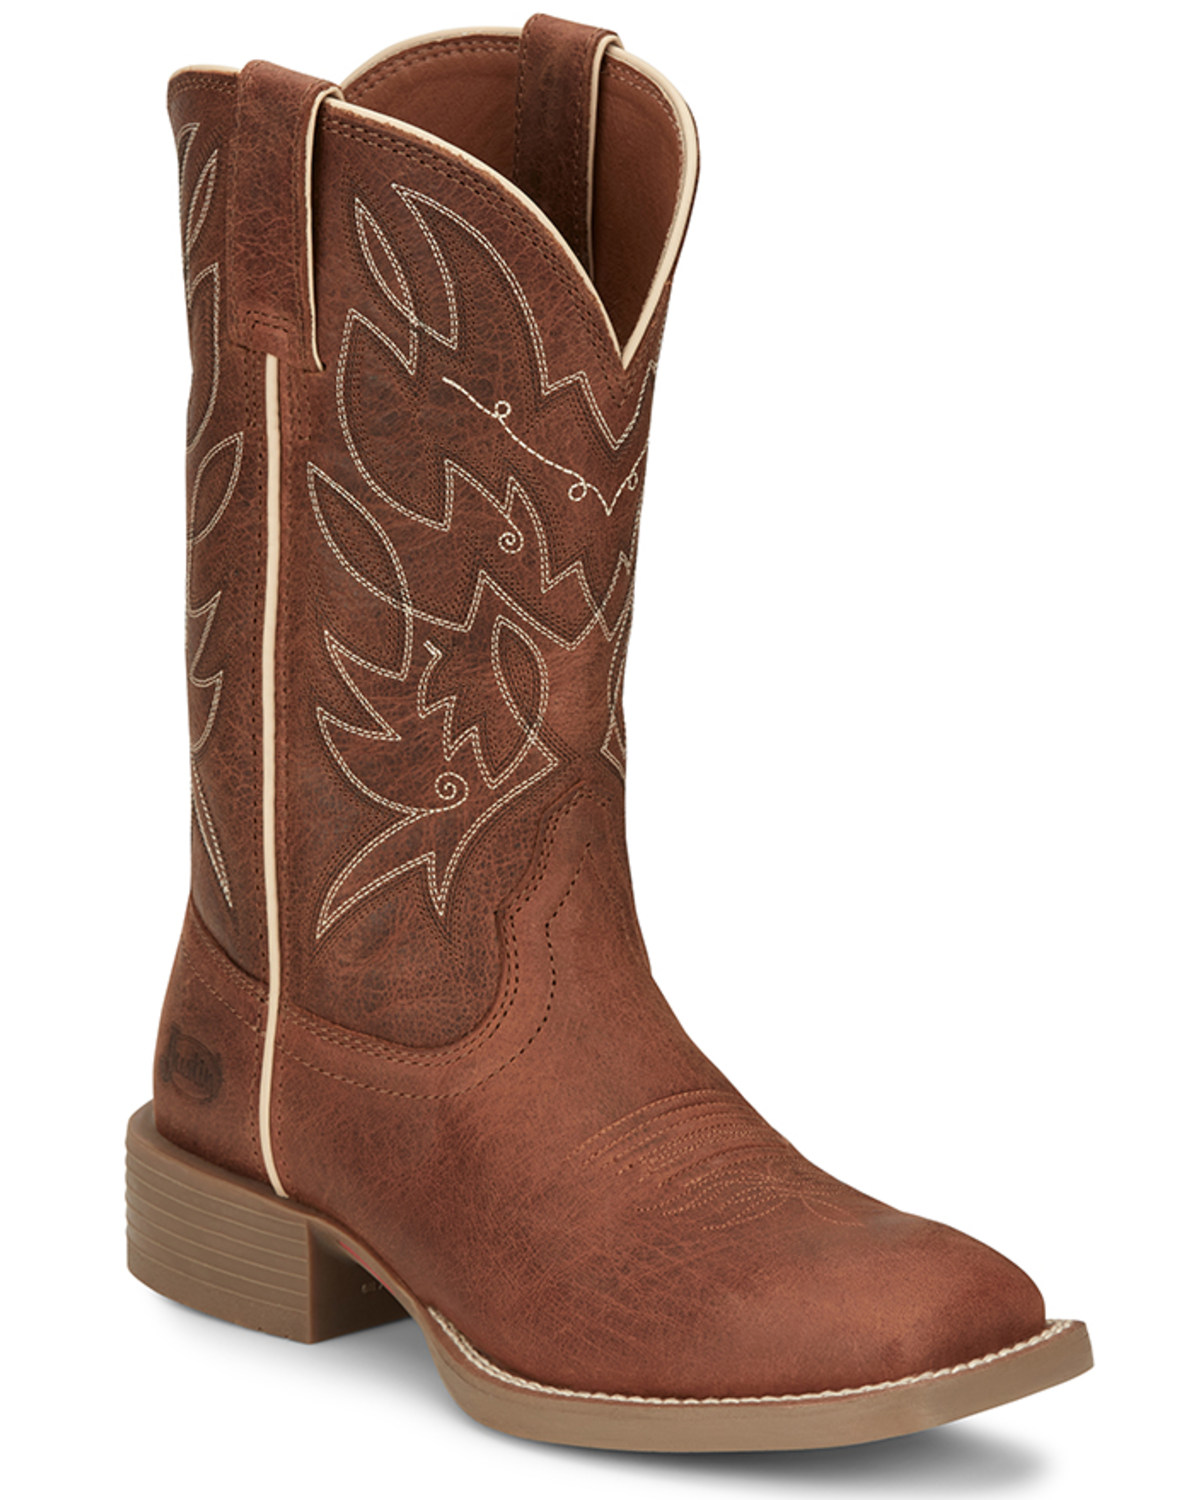 Justin Women's Halter Western Boots - Broad Square Toe